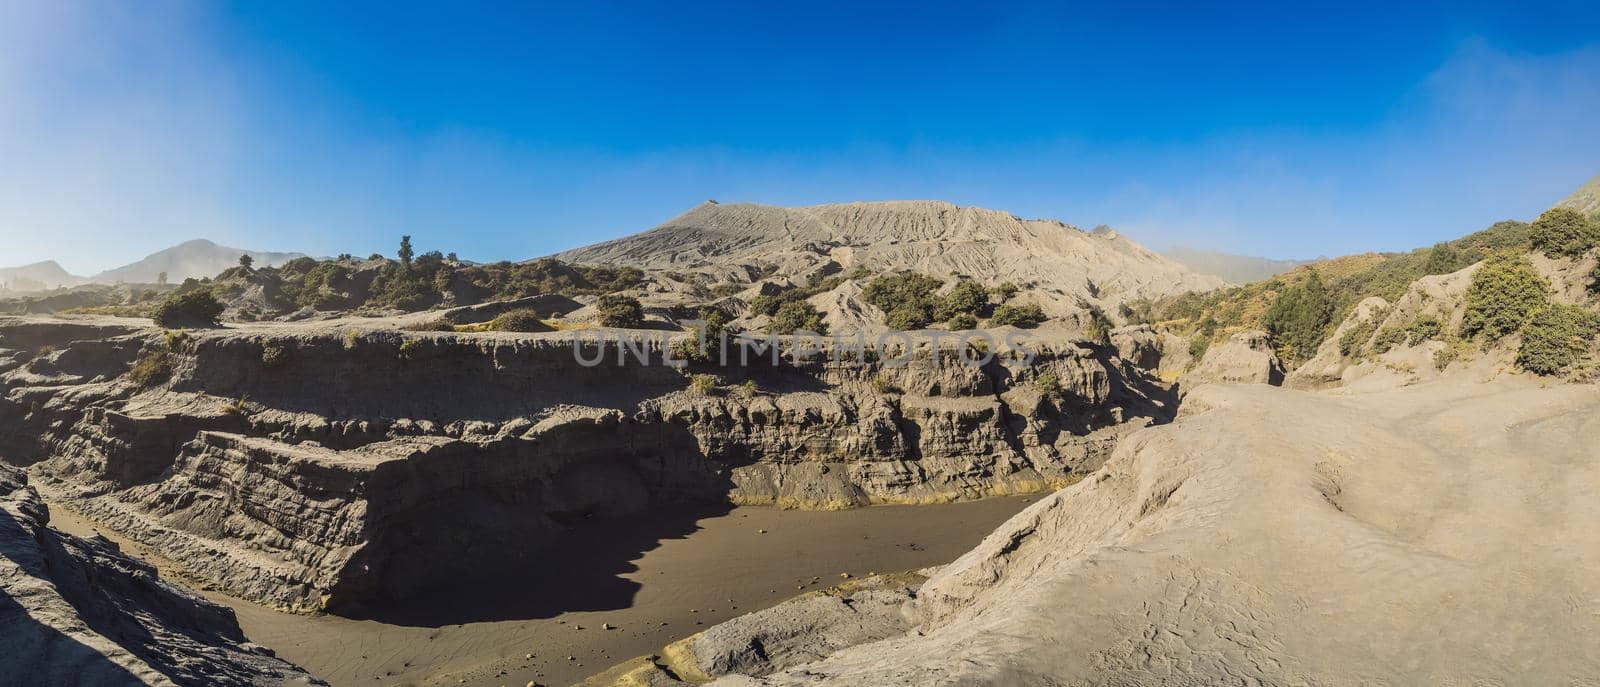 panoramic View on the Bromo volcano or Gunung Bromo on Indonesian in the Bromo Tengger Semeru National Park on the Java Island, Indonesia. One of the most famous volcanic objects in the world. Travel to Indonesia concept.